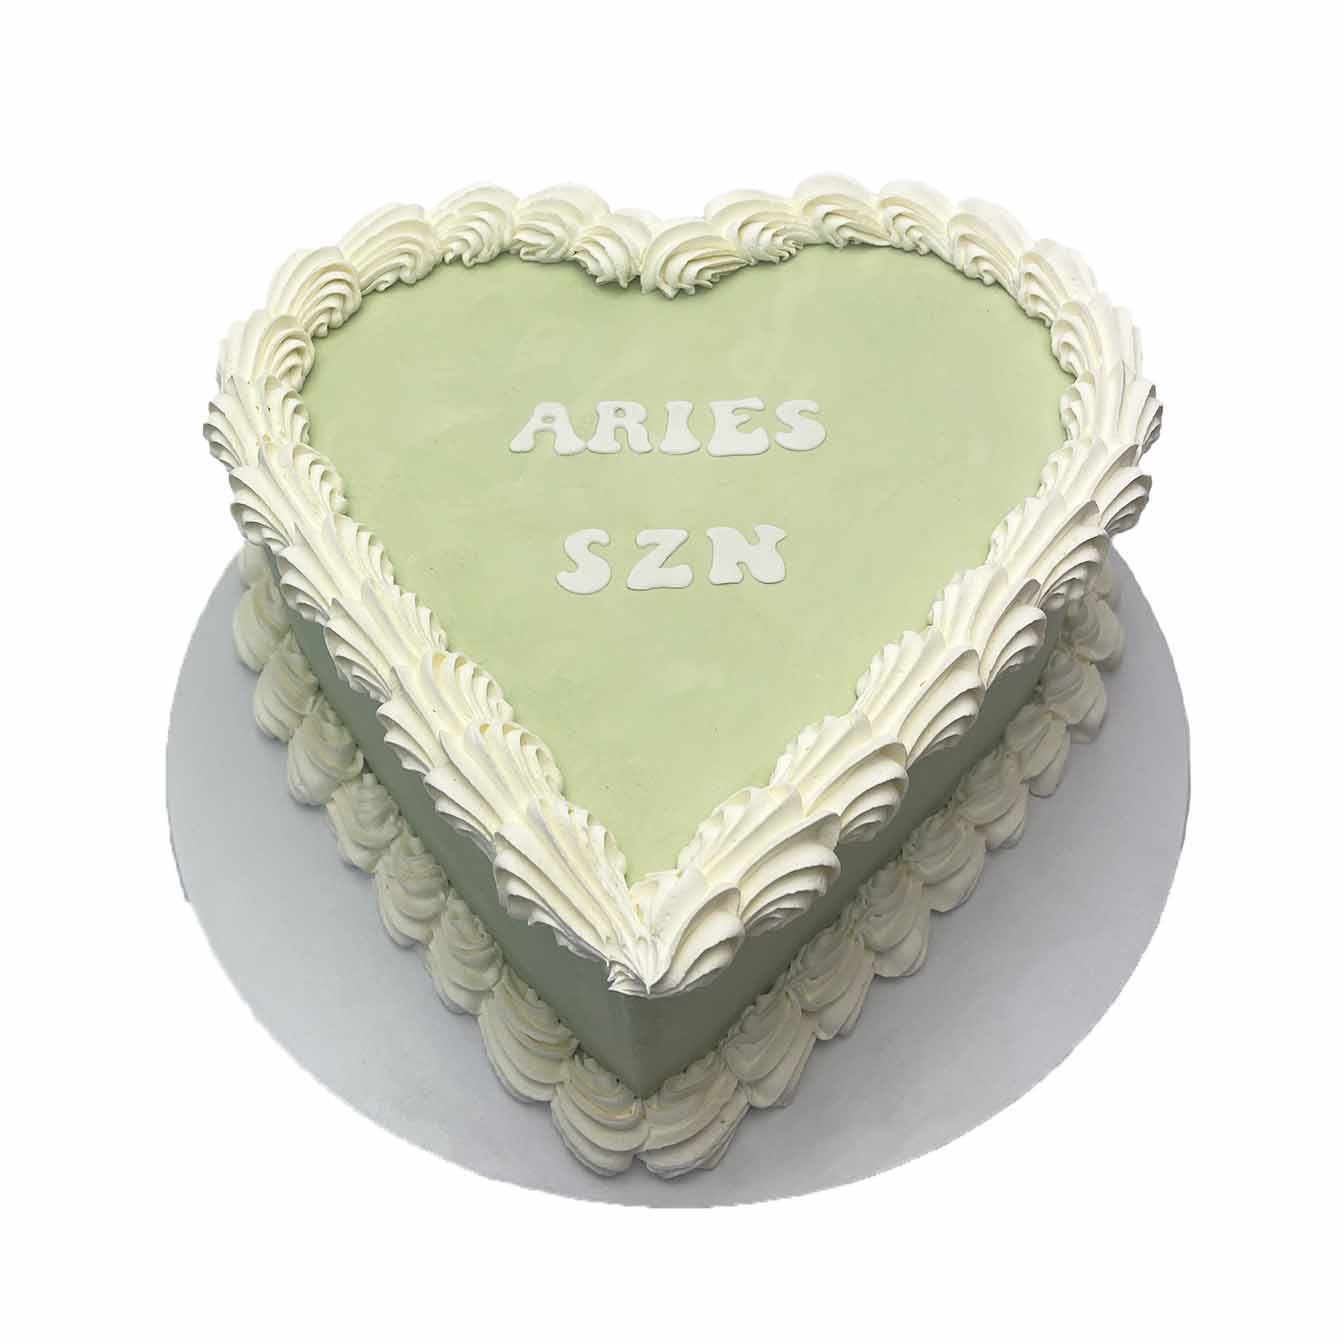 Heartfelt Love Cake - A heart-shaped cake with piped edges, a delightful centrepiece perfect for romantic occasions and heartfelt celebrations.